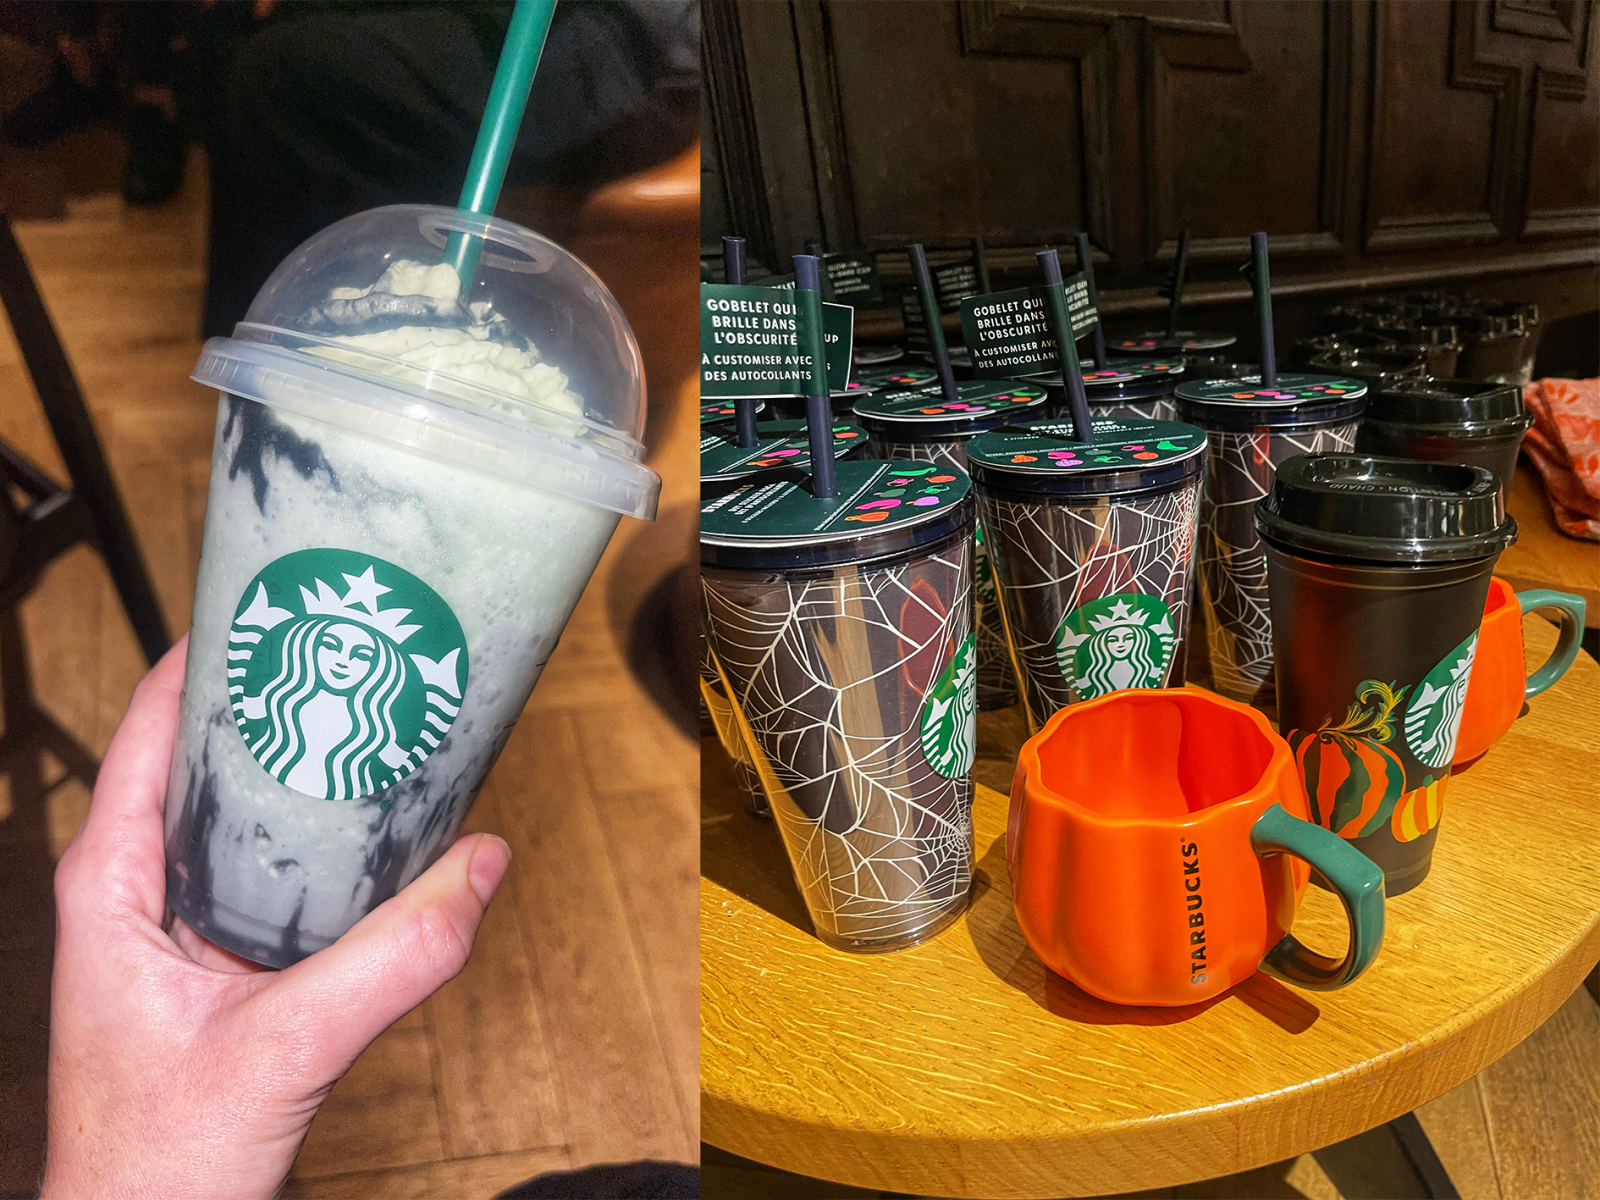 The Halloween selection from Starbucks. 